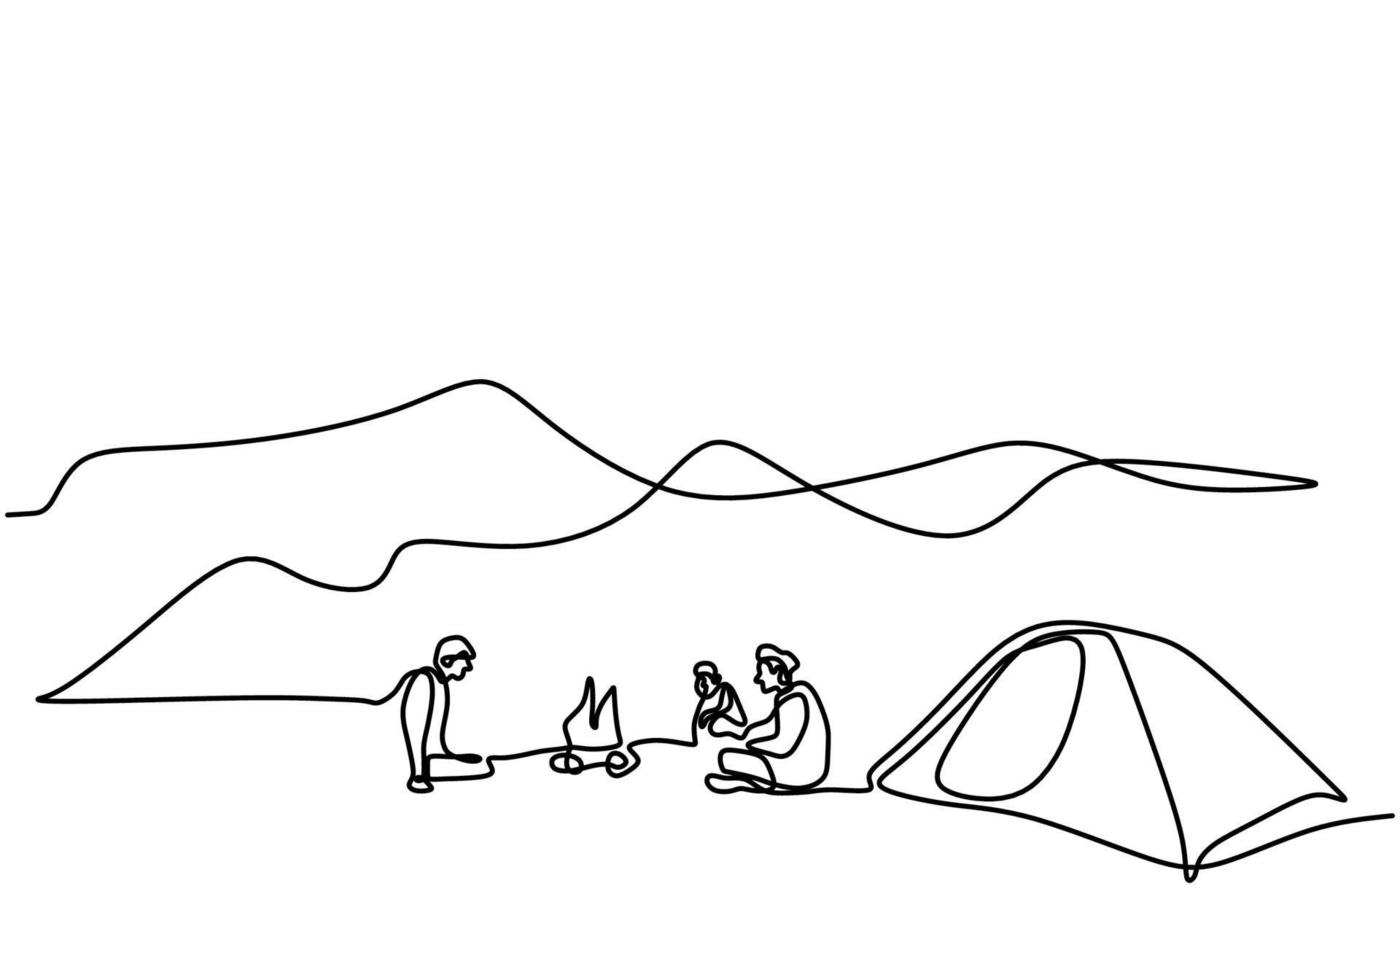 One line drawing people camping. Young man enjoy outdoor activity with tents and campfire. Adventure camping and exploration. Male excited by camping in the mountains enjoying nature vector